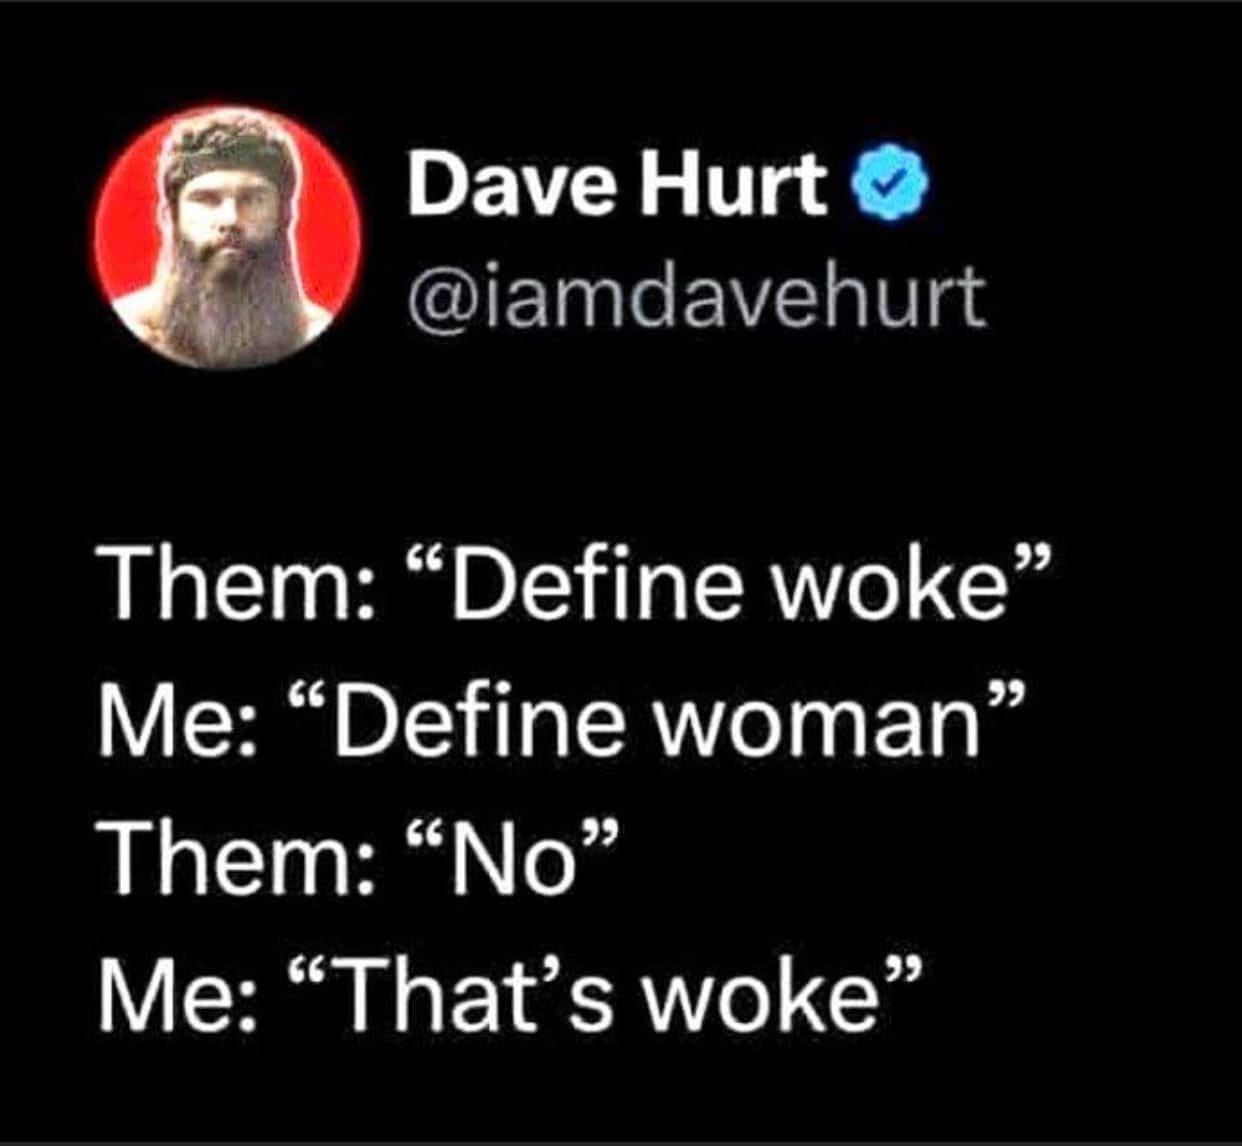 May be an image of one or more people, beard and text that says 'Dave Hurt @iamdavehurt Them: "Define woke" Me: "Define woman" Them: "No" Me: "That's woke"'